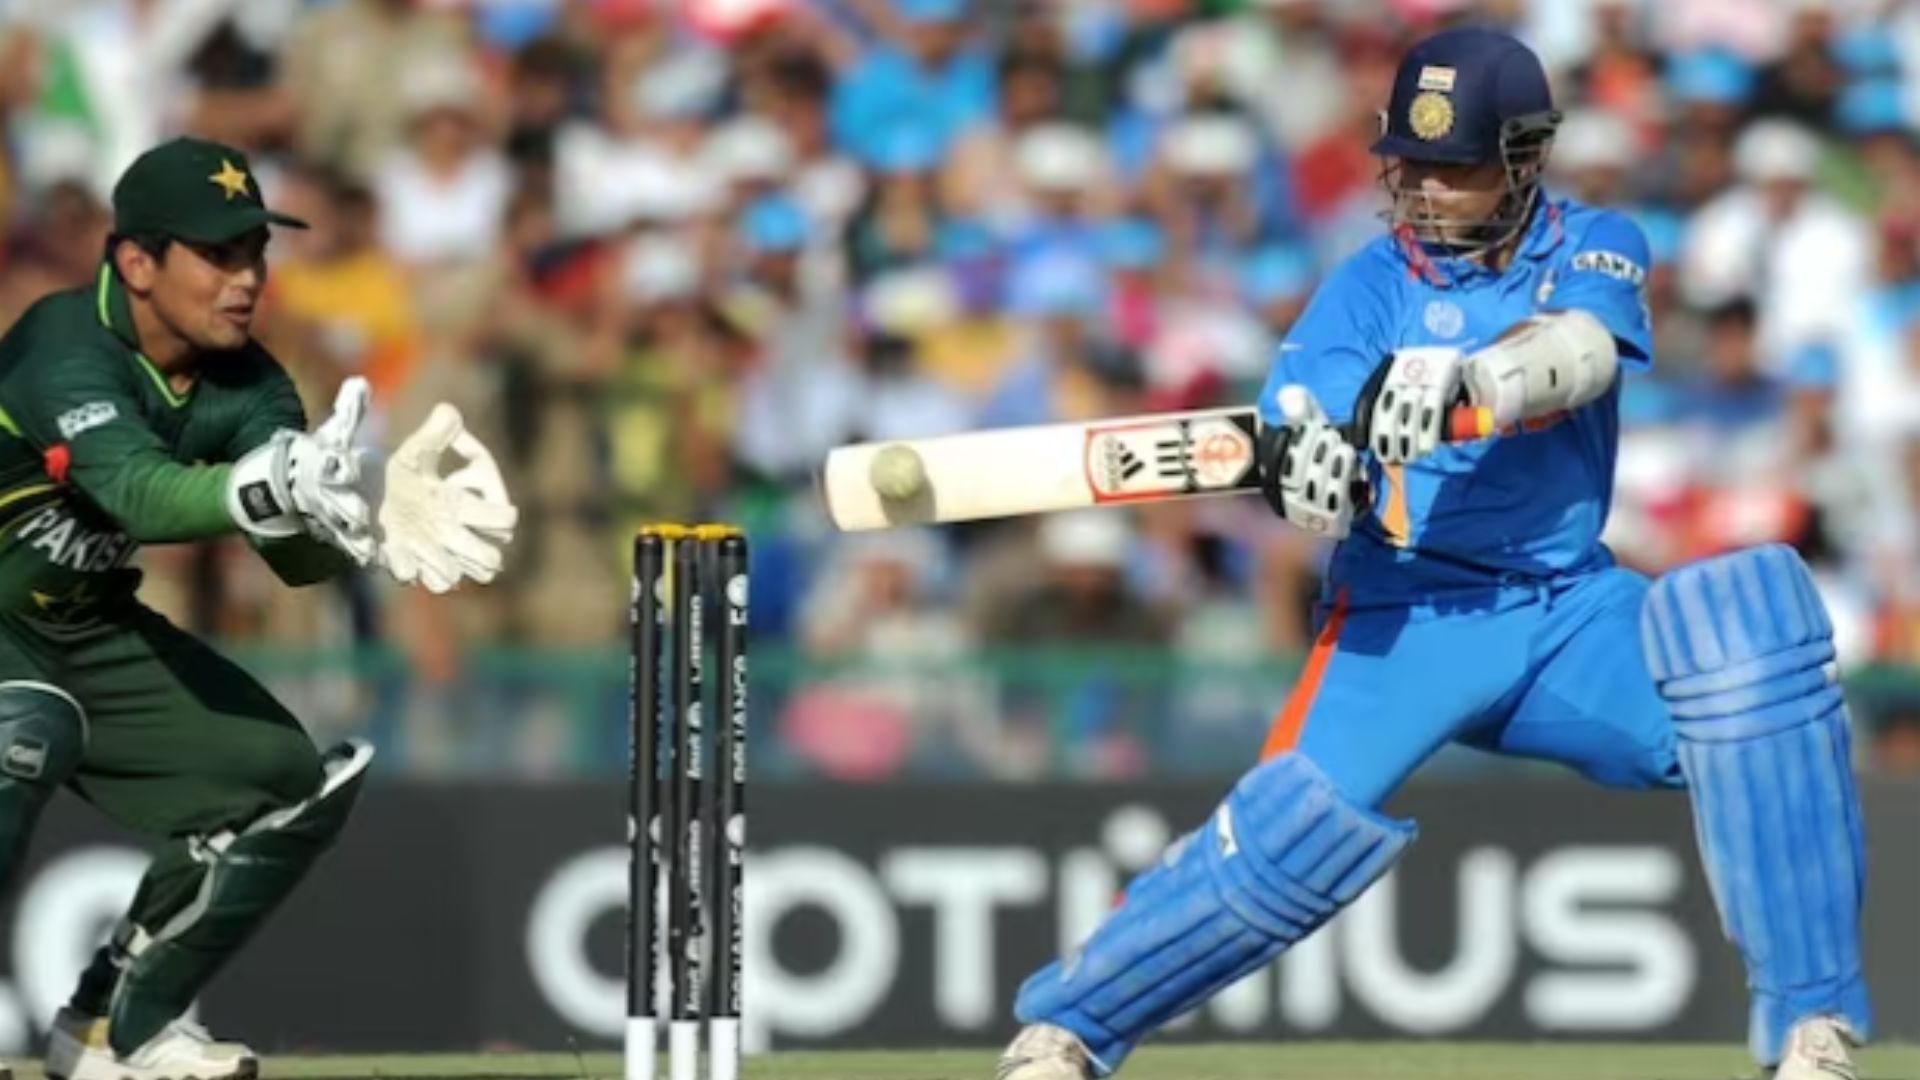 Sachin Tendulkar en route to his match-winning knock of 85 against Pakistan during the 2011 WC semi-final (Pic:AFP)